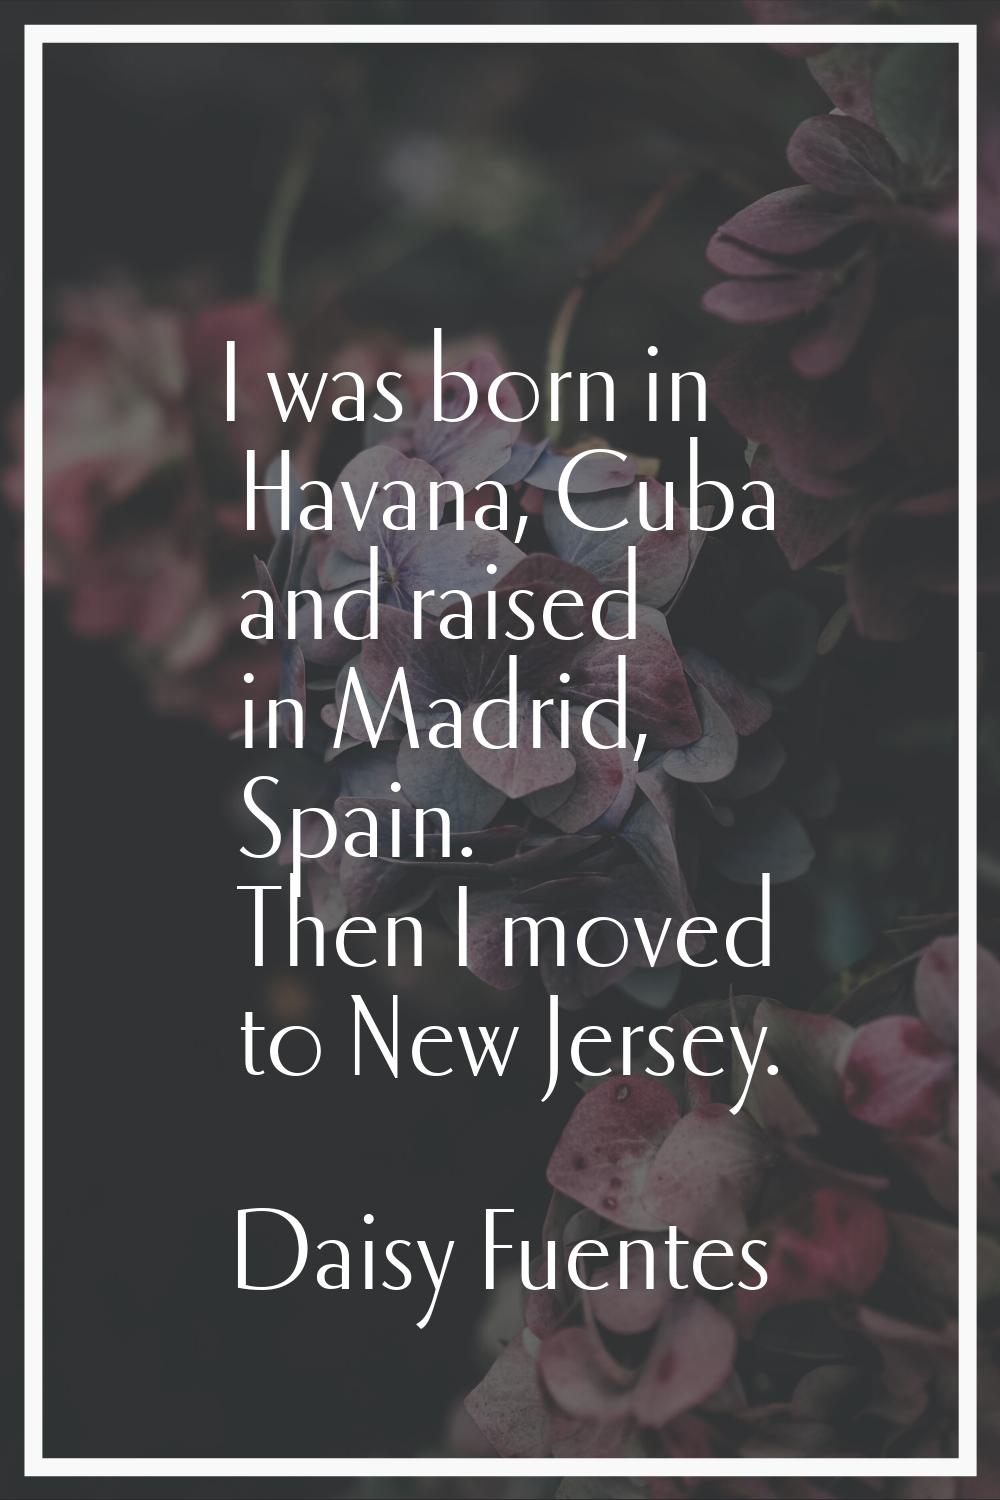 I was born in Havana, Cuba and raised in Madrid, Spain. Then I moved to New Jersey.